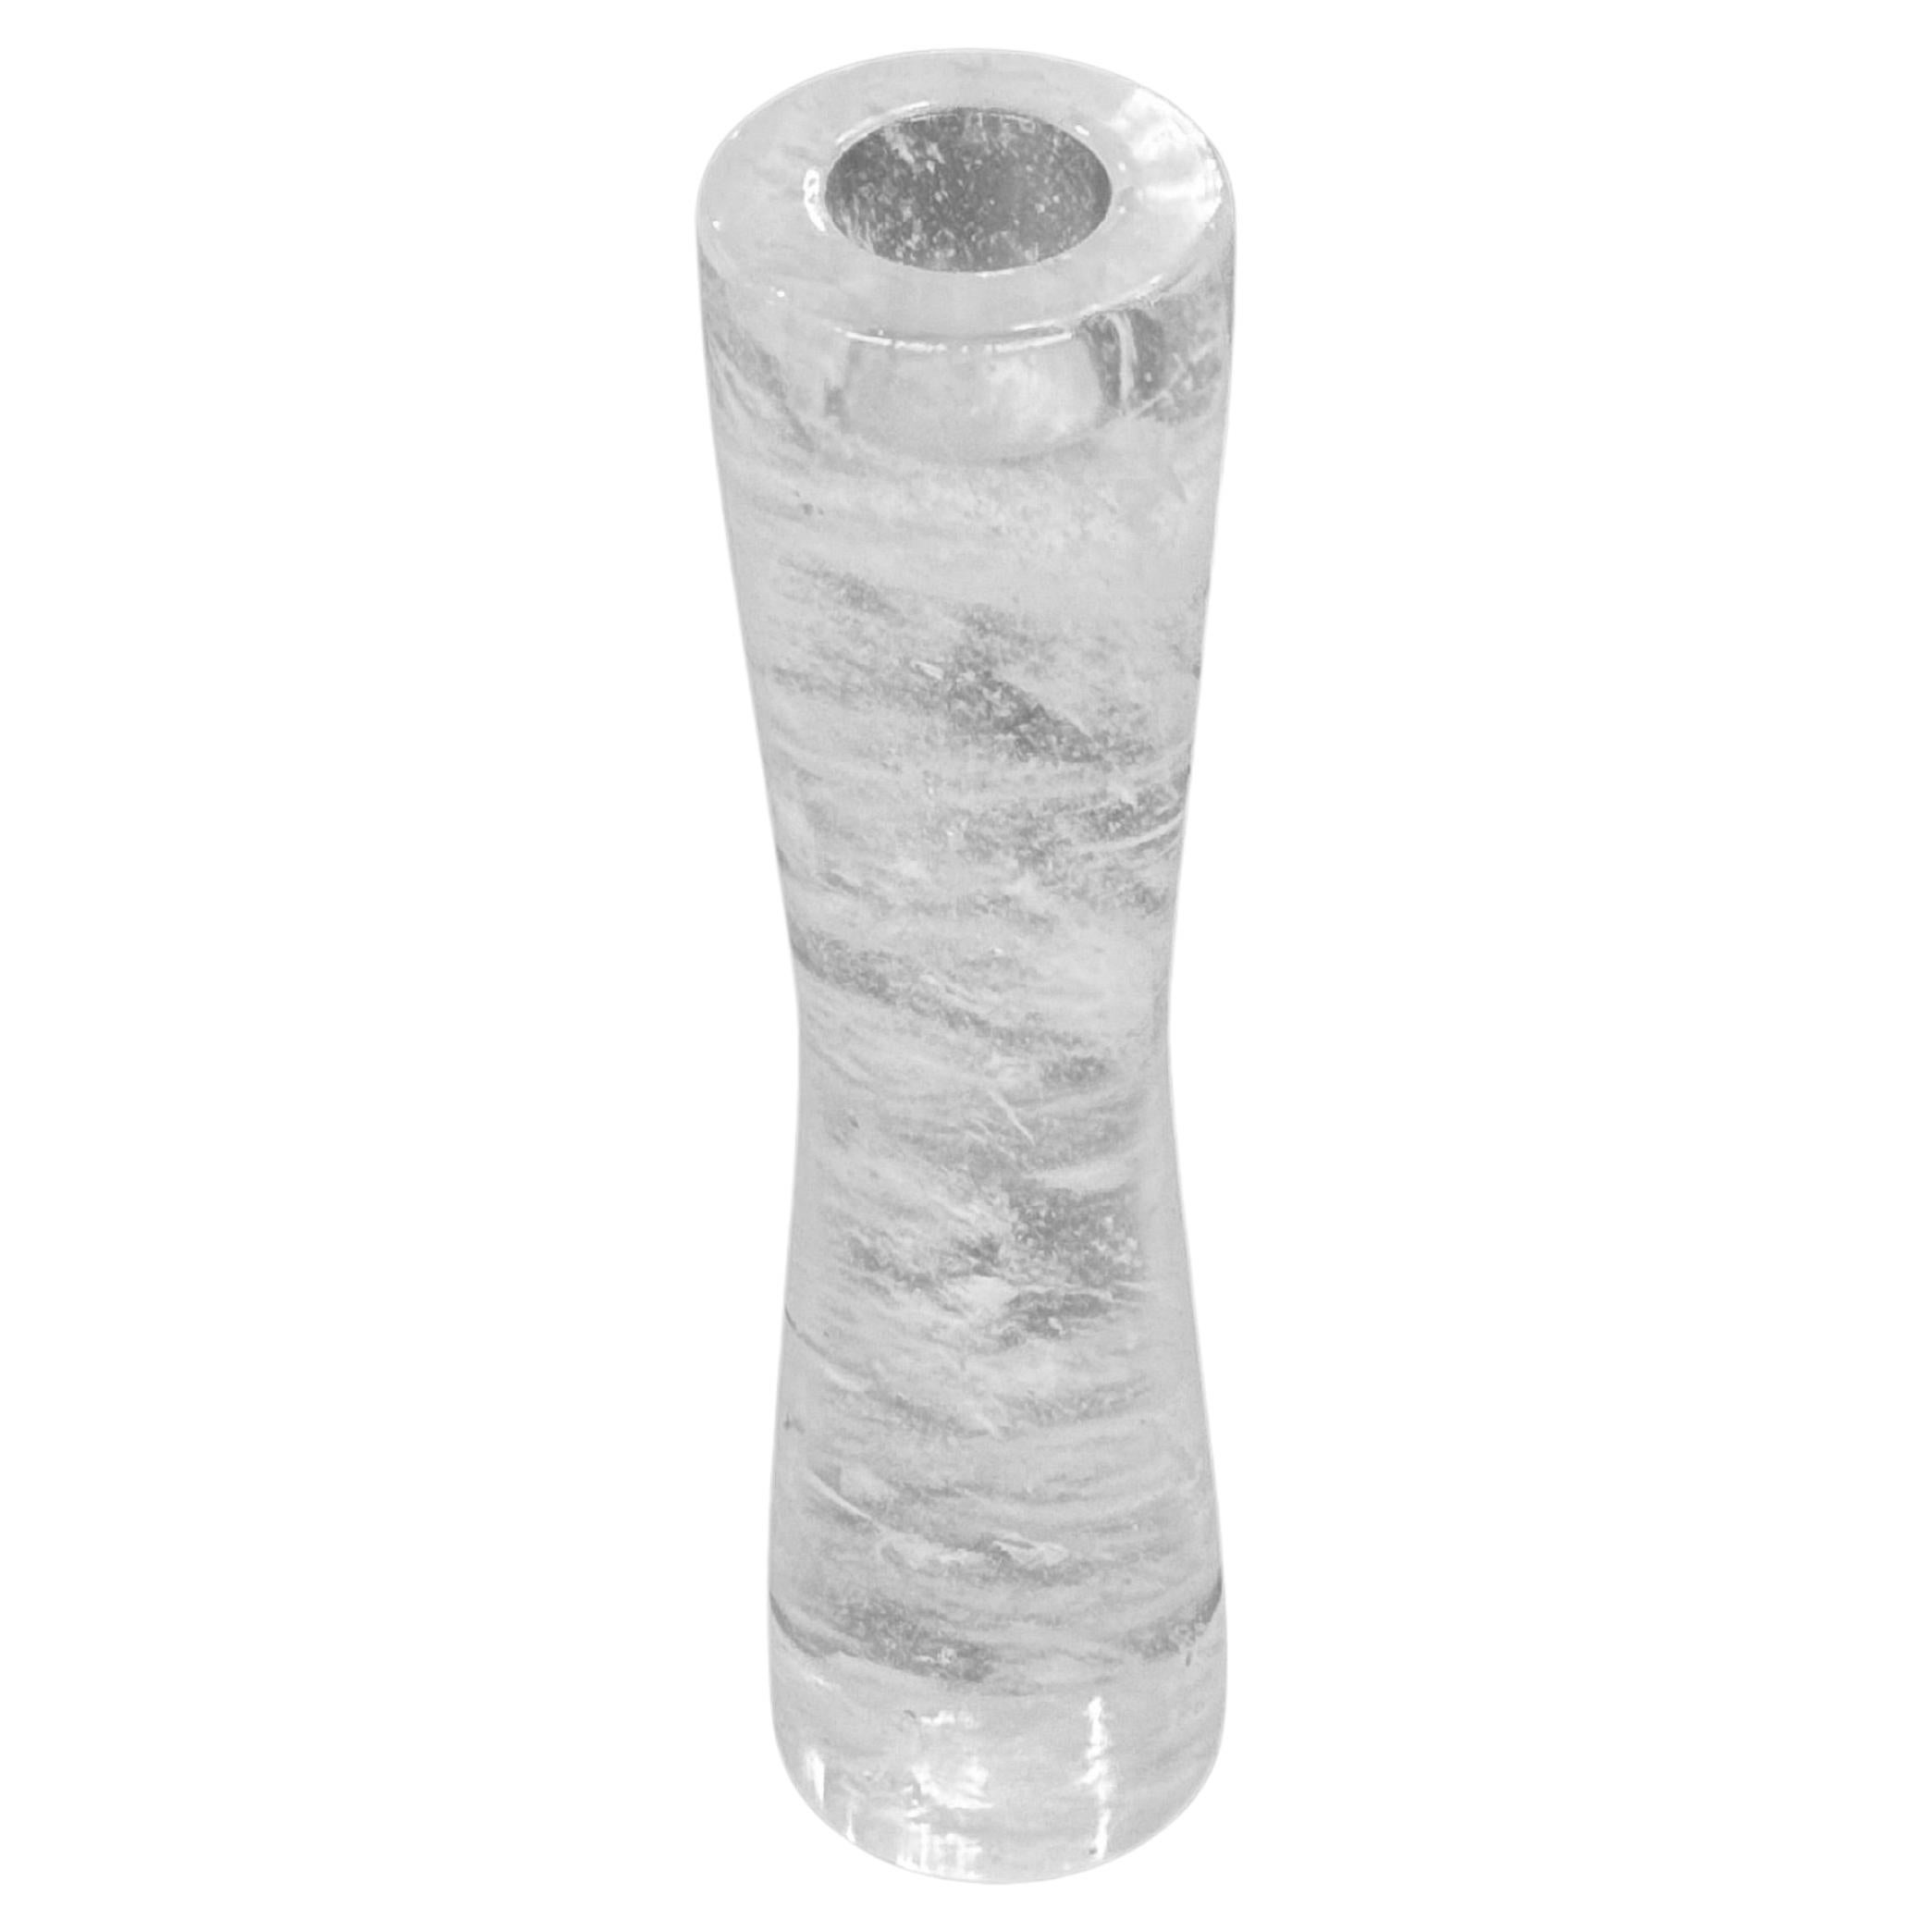 Handmade Rock Crystal Candle Holders For Sale